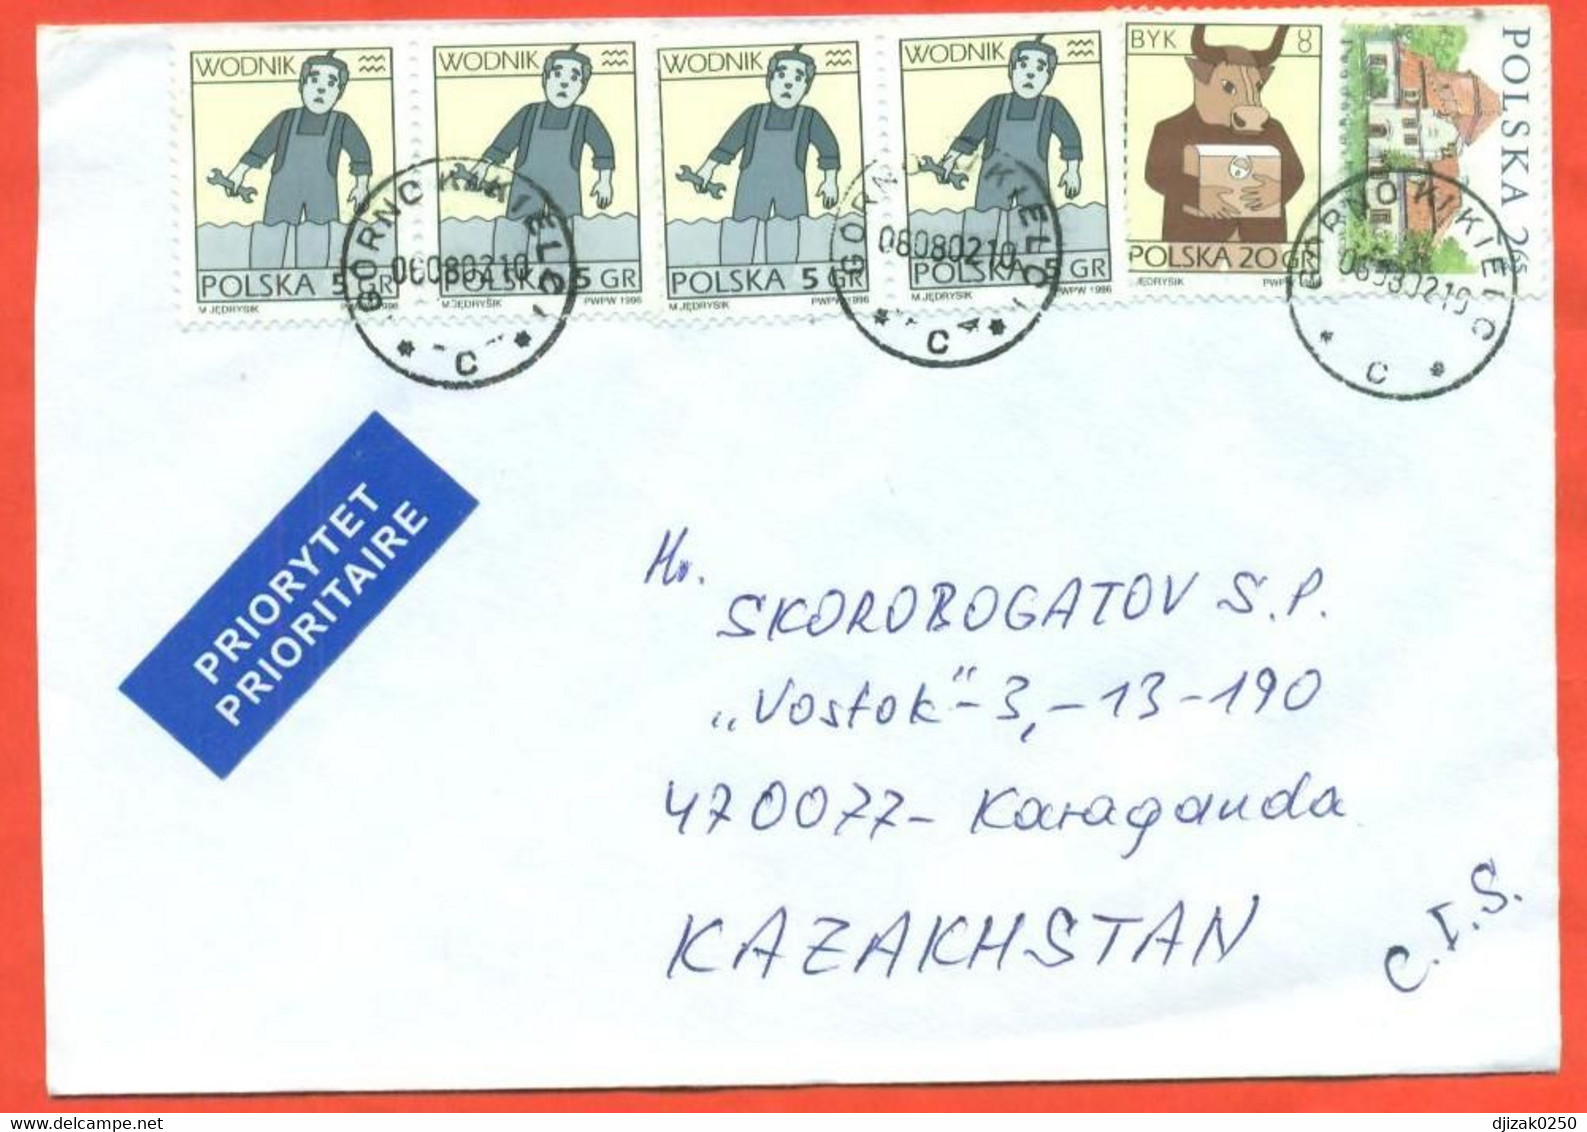 Poland 2002. The Envelope  Passed Through The Mail. Airmail. - Briefe U. Dokumente